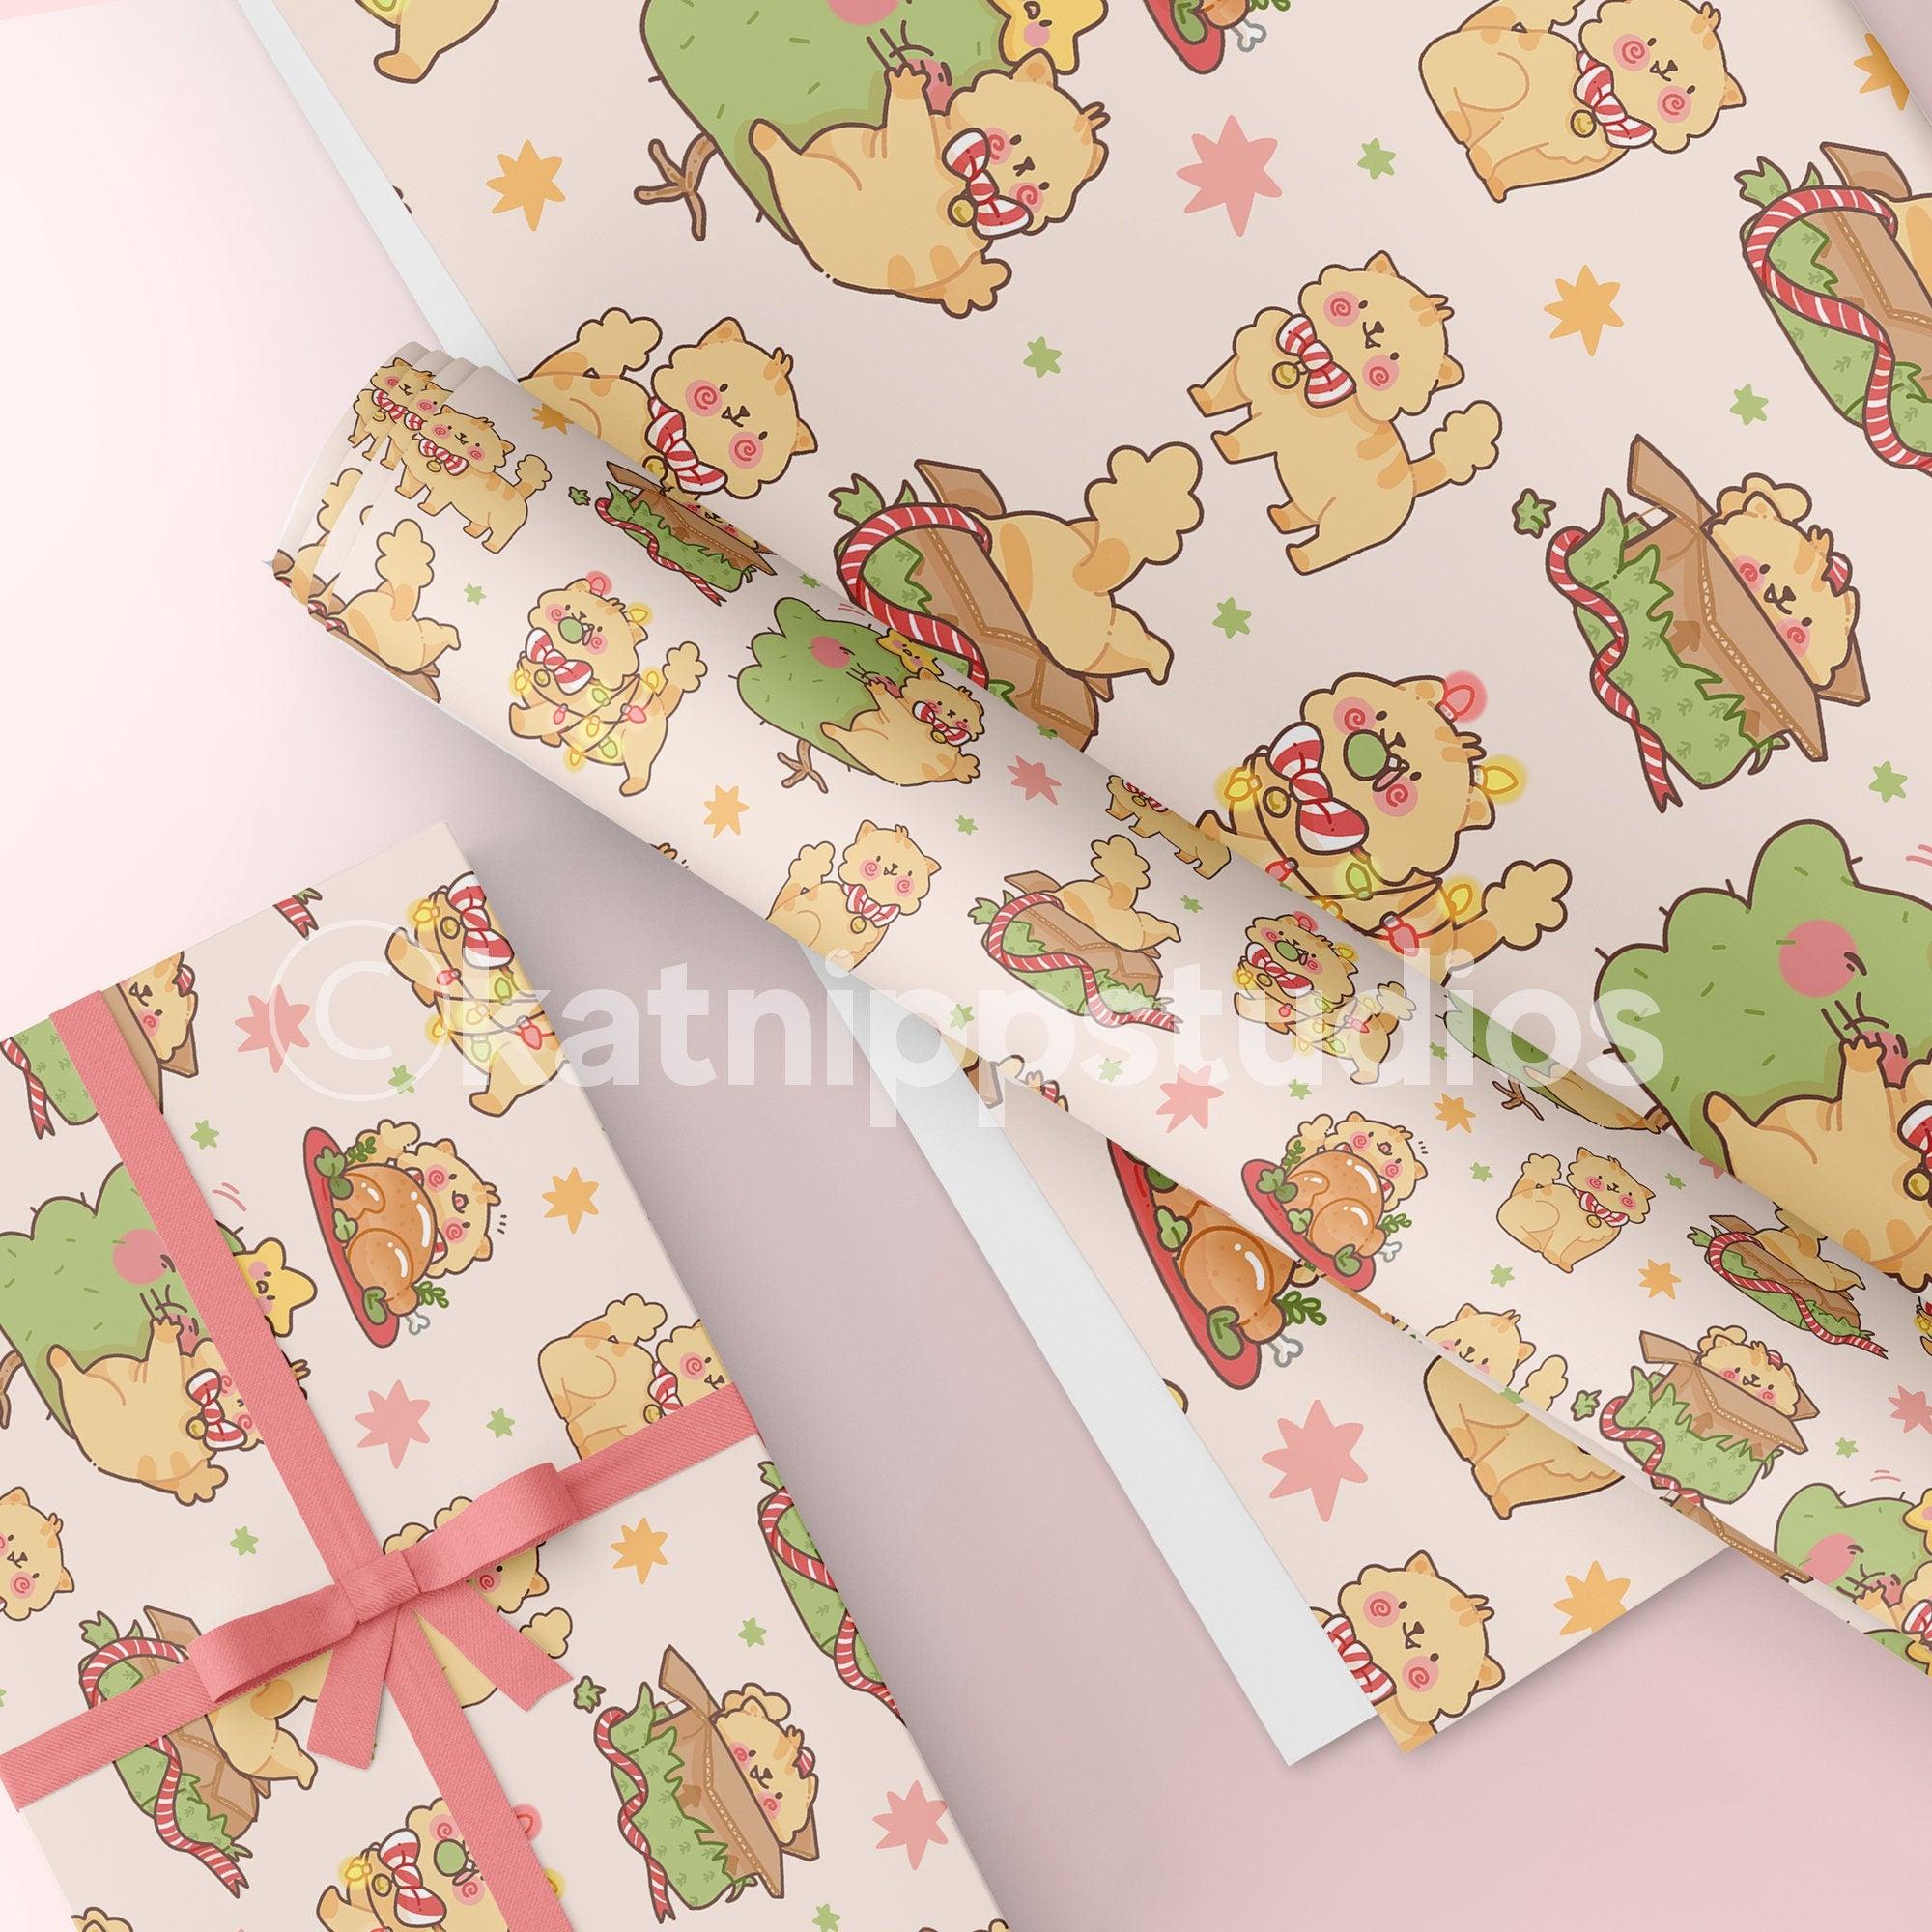 Peppamint the Cat Luxury Christmas Wrapping Paper - Katnipp Studios